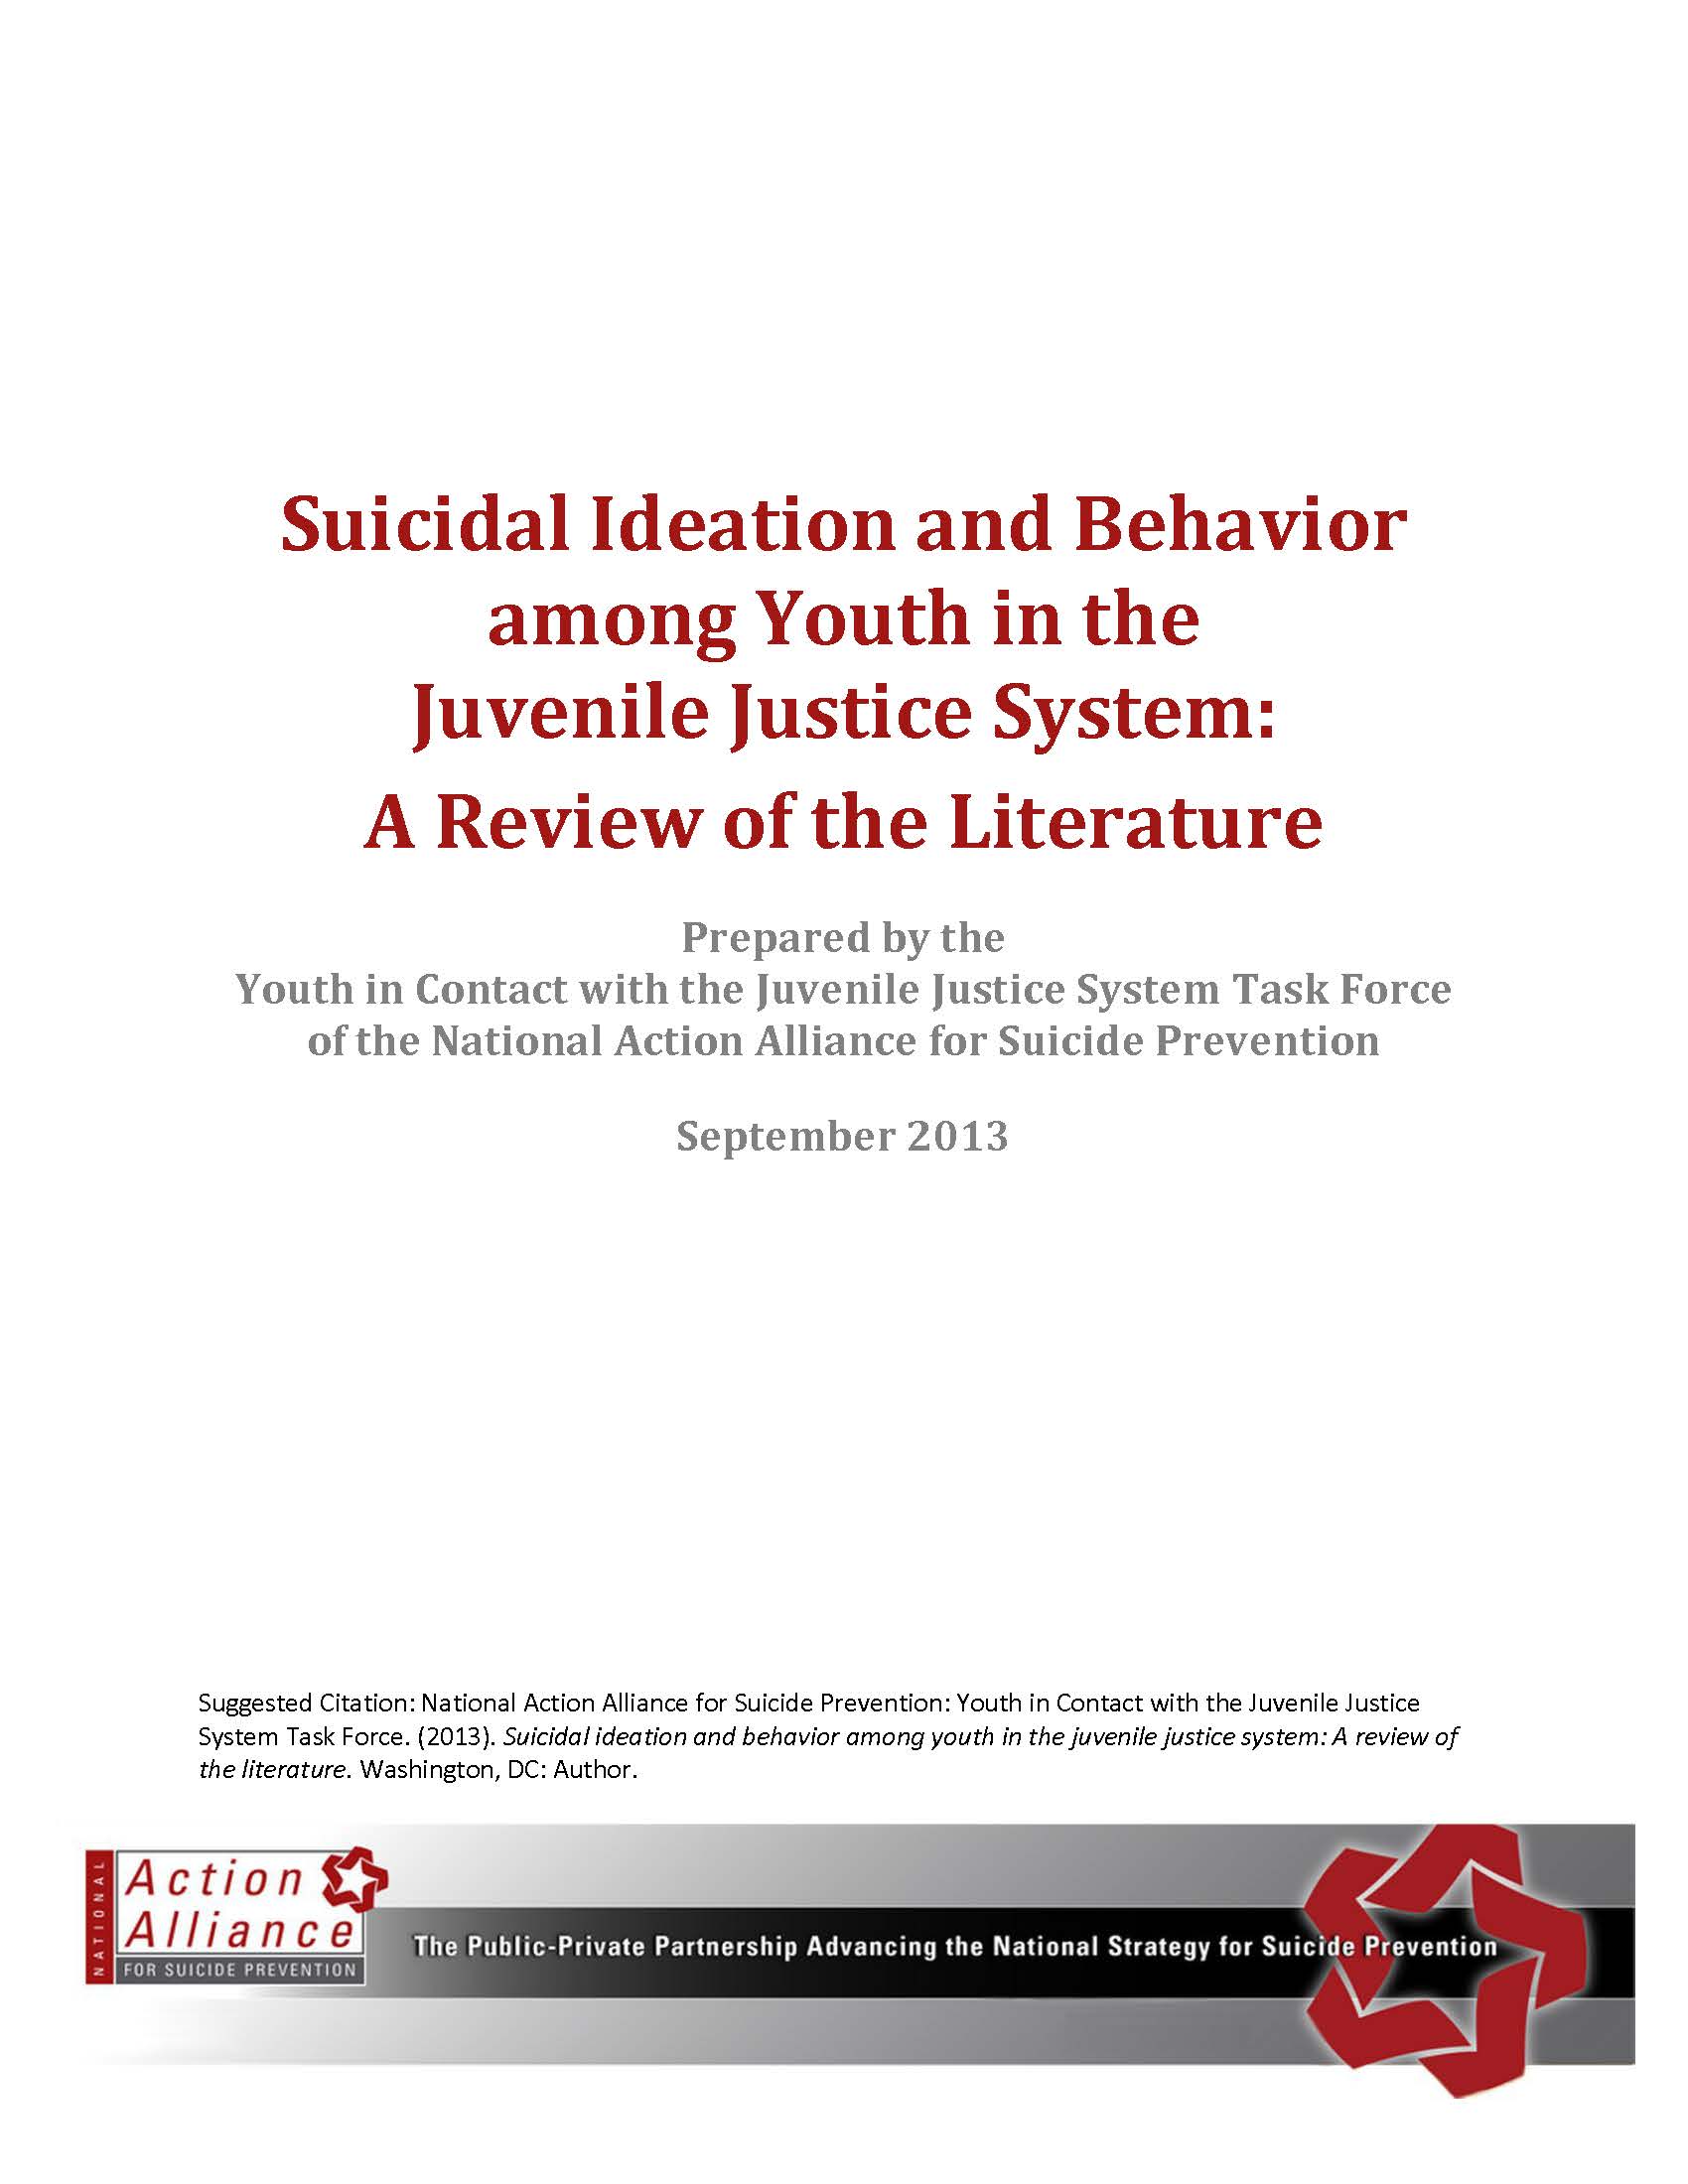 thesis about suicidal ideation